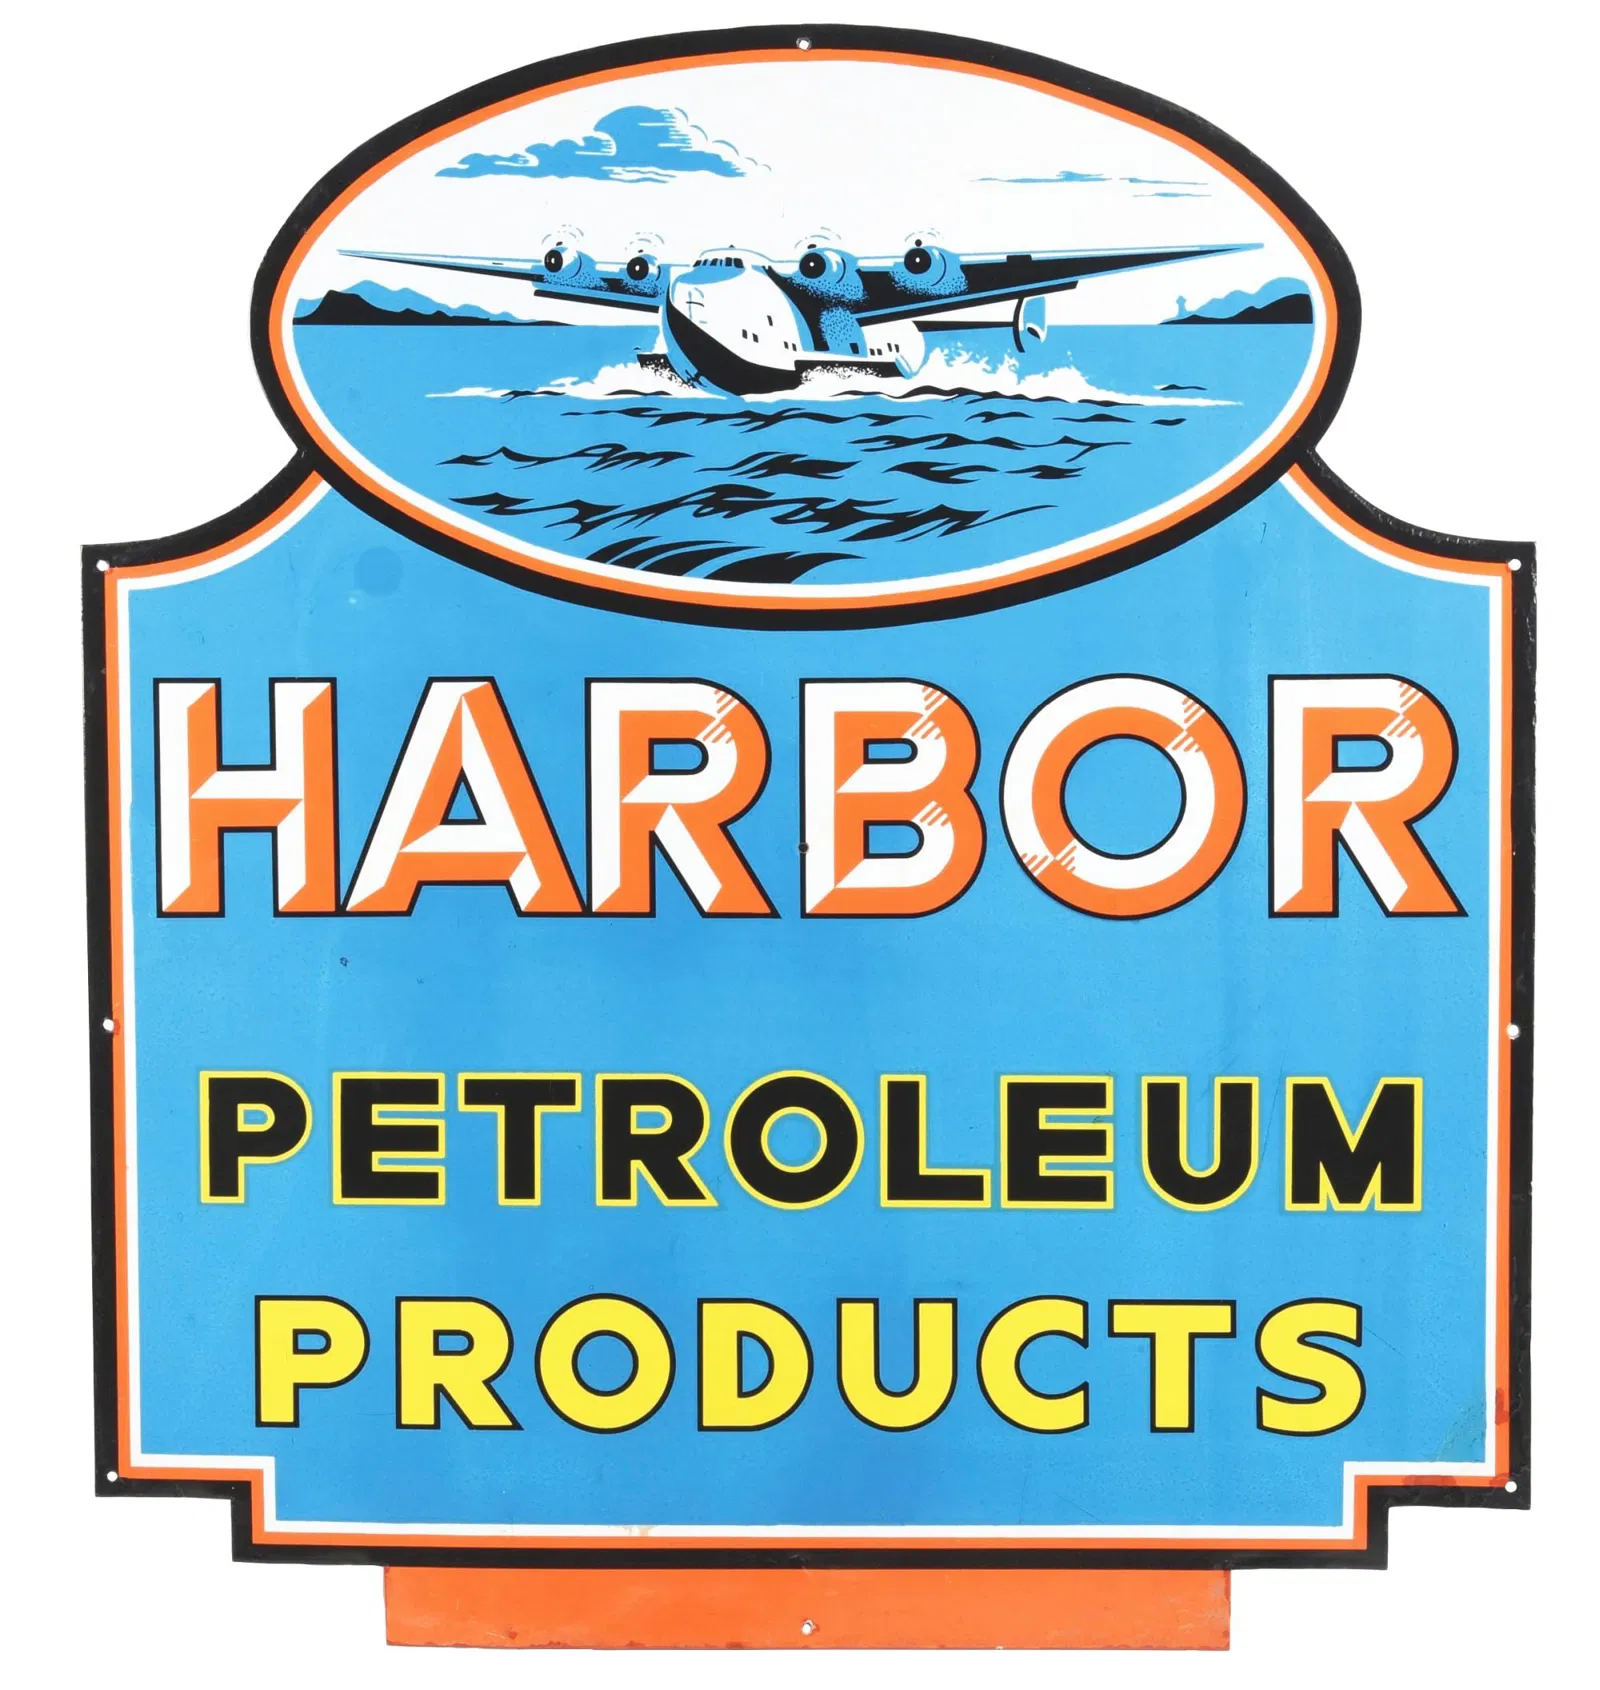 The sale’s top lot was a rare and exceptional circa-1940s Harbor Petroleum Products single-sided porcelain advertising sign with an exciting seaplane graphic. Outstanding color and gloss. Size: 39in x 35in. Condition: 8.75. Sold with estimate range for $46,740